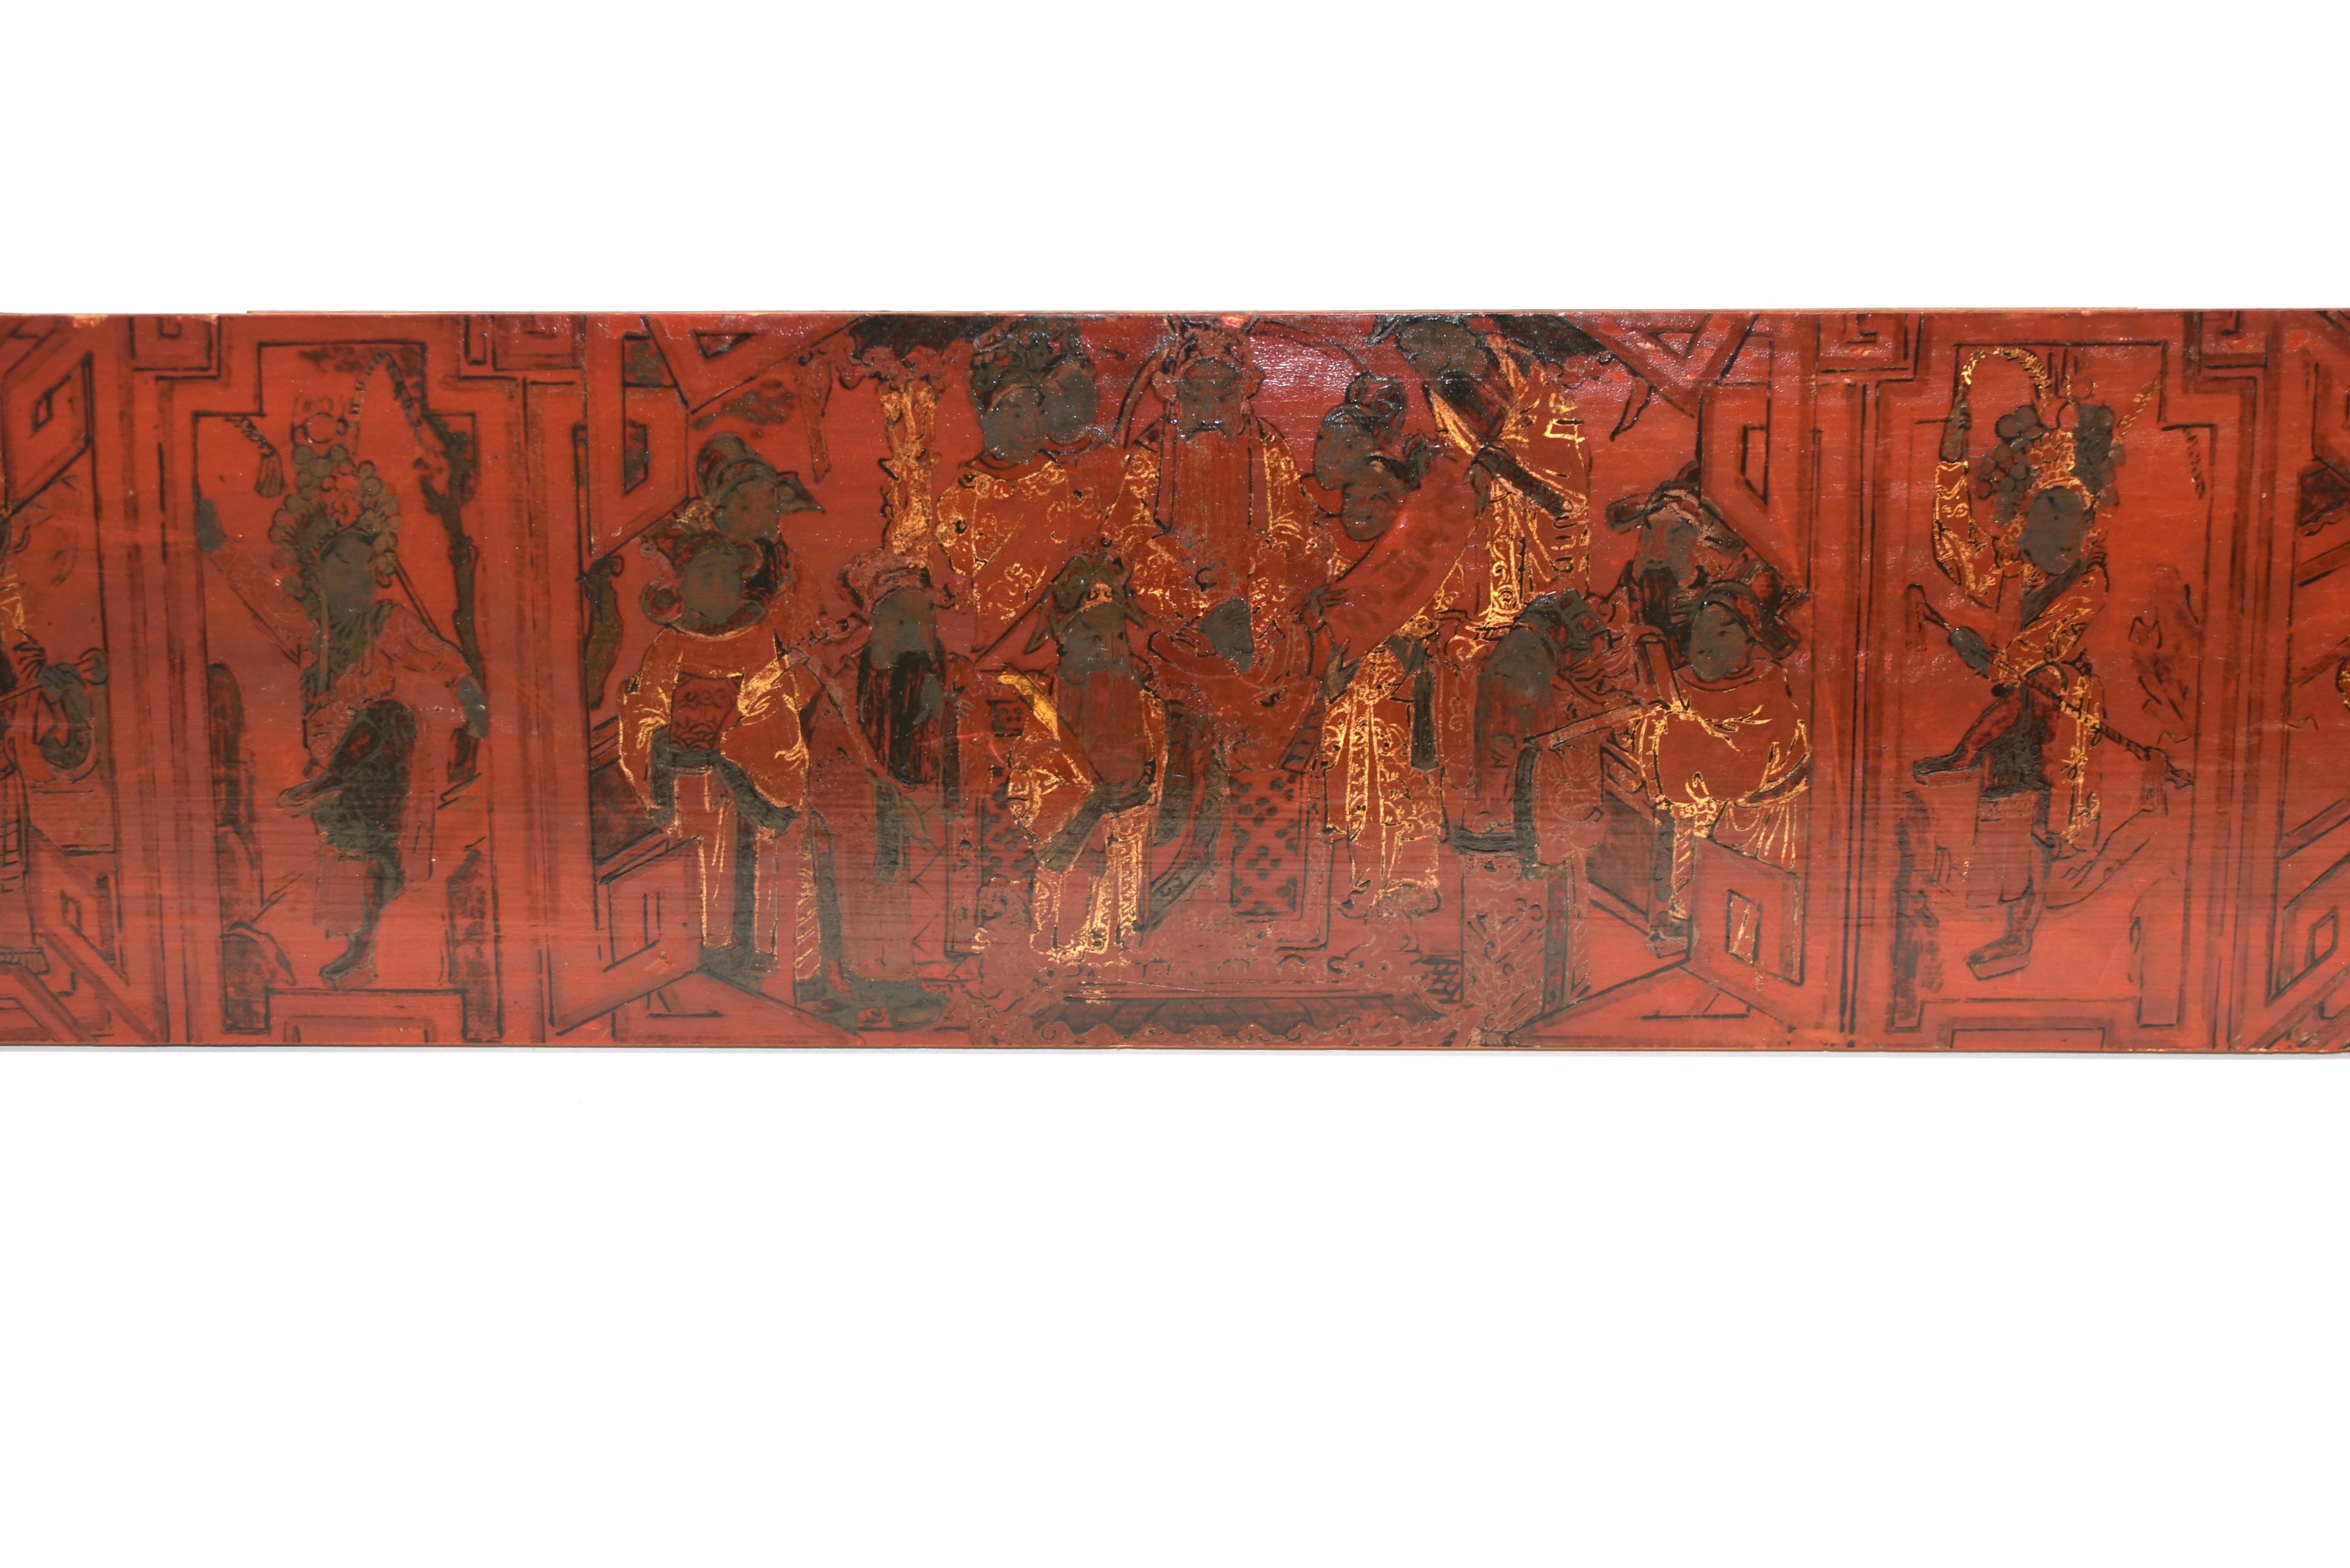 A beautiful red lacquered, solid wood fragment painted with an opera scene of victory celebration, featuring various figures dressed in official uniforms and crowns. Remnant gold leaf visible throughout the painting, especially on clothes and